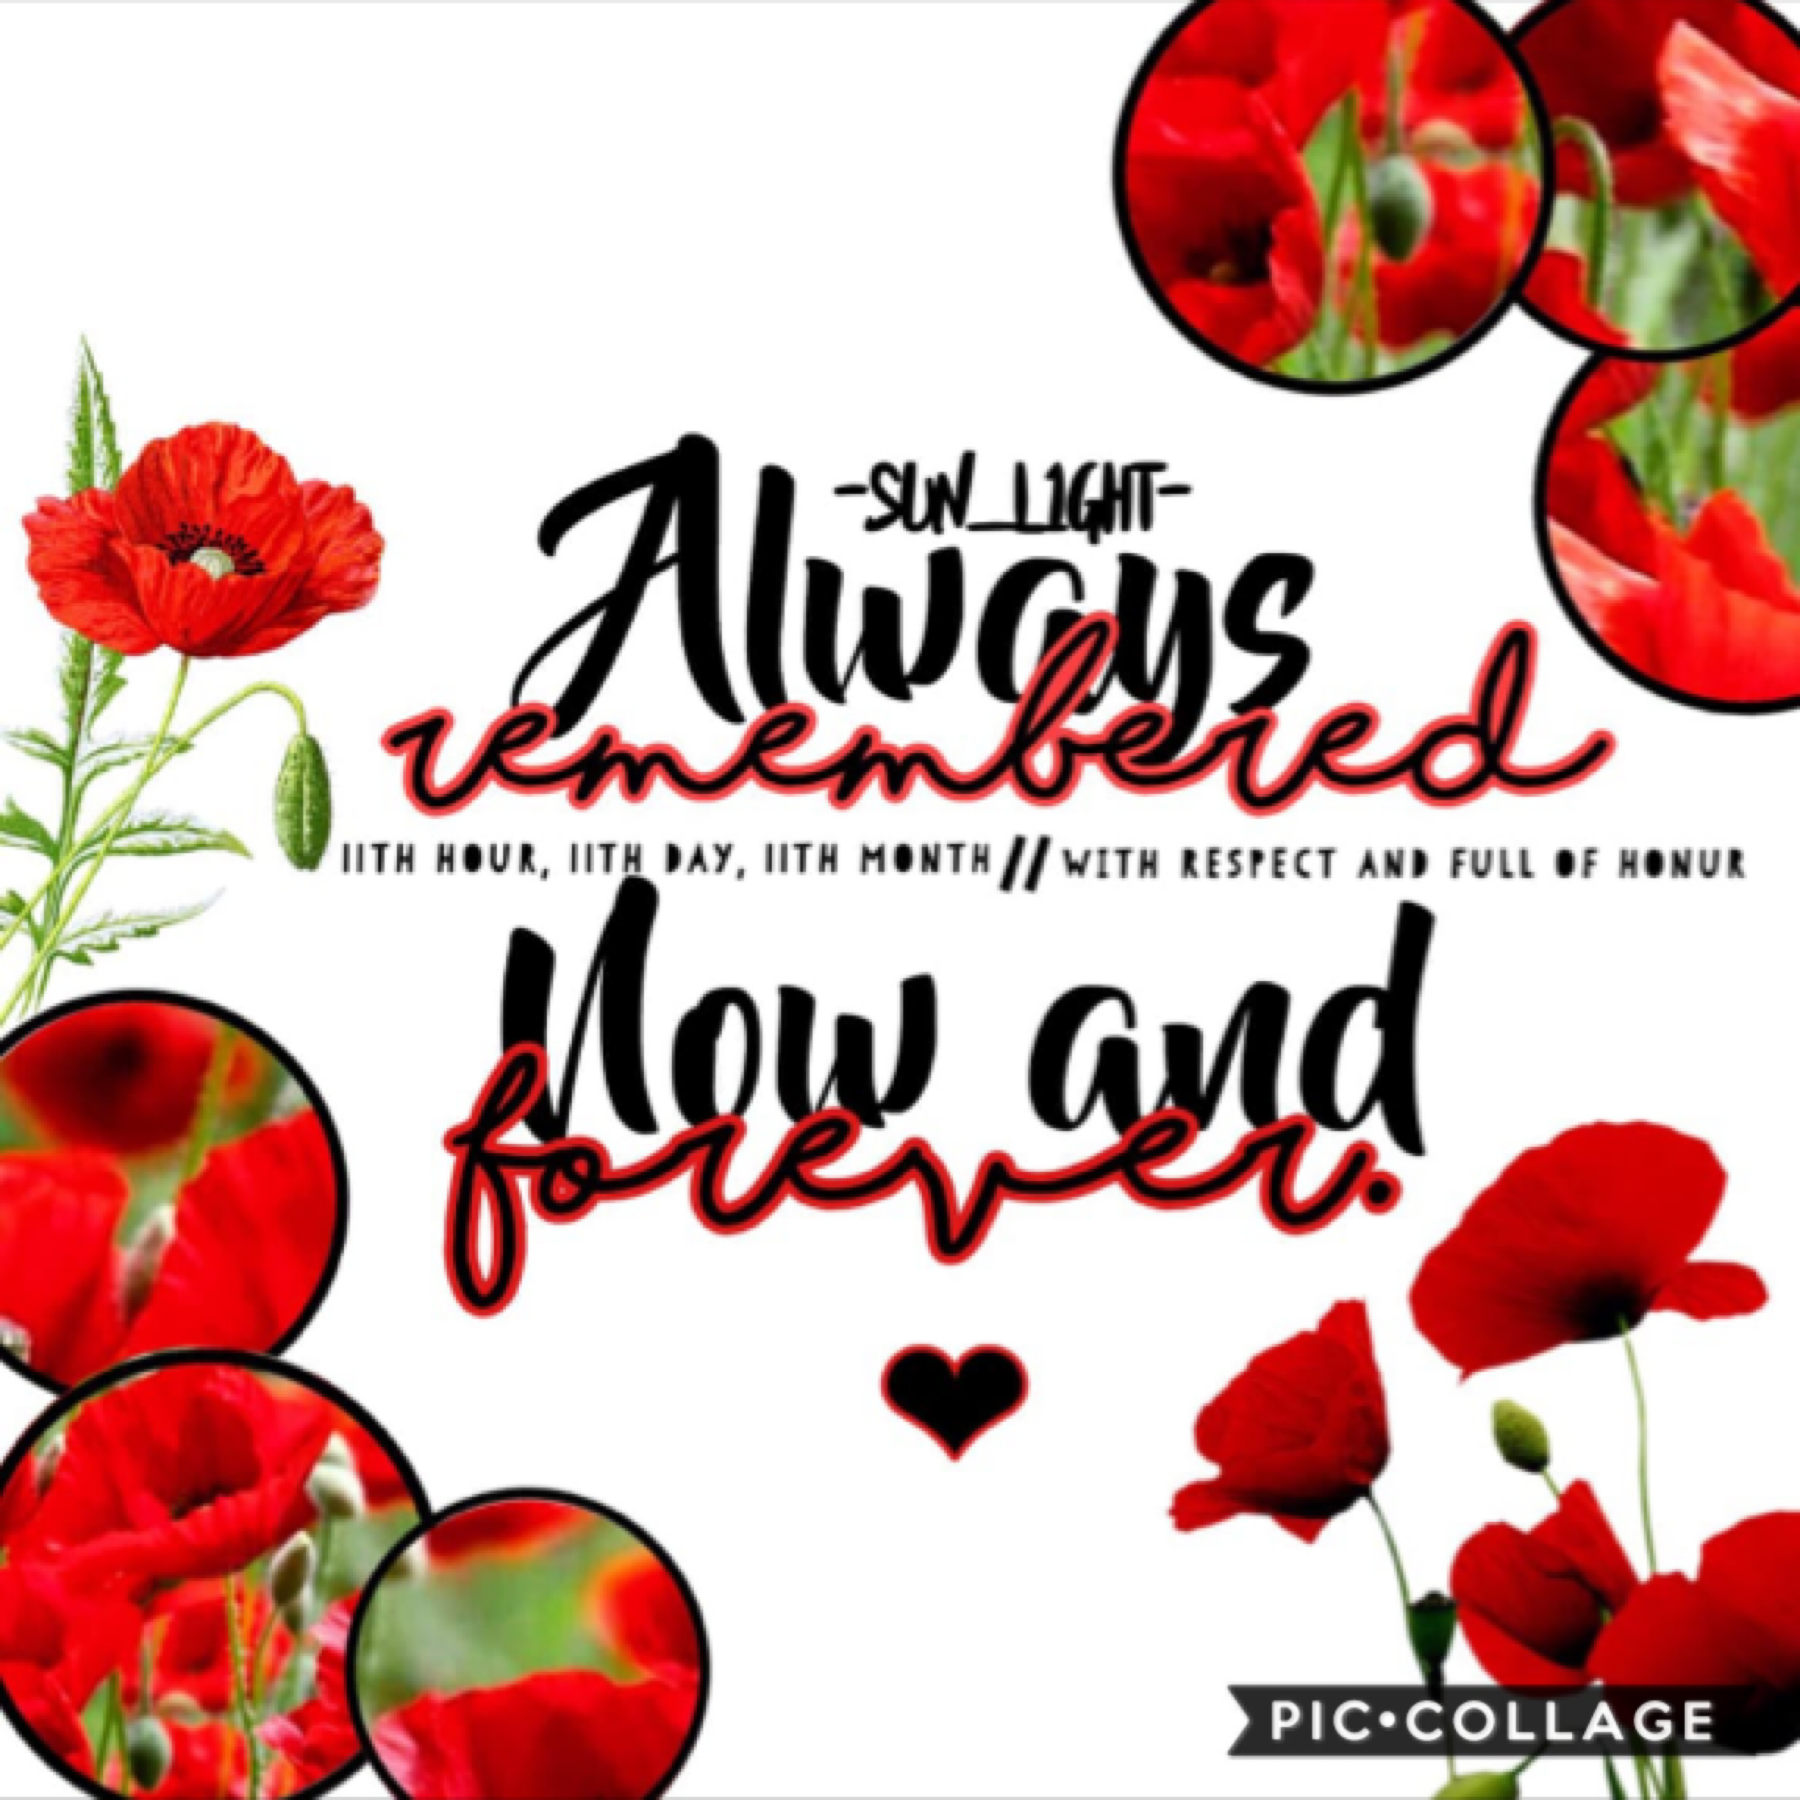 🌺🌹[ 11 / 11 / 19 ]🌹🌺
repost from last year. 
making this collage a tradition every Remembrance Day.
[ 17 / 11 / 19 ]
soz its late y'all. this proves, we should remember the soldiers not only on the 11th. lest we forget 🥀